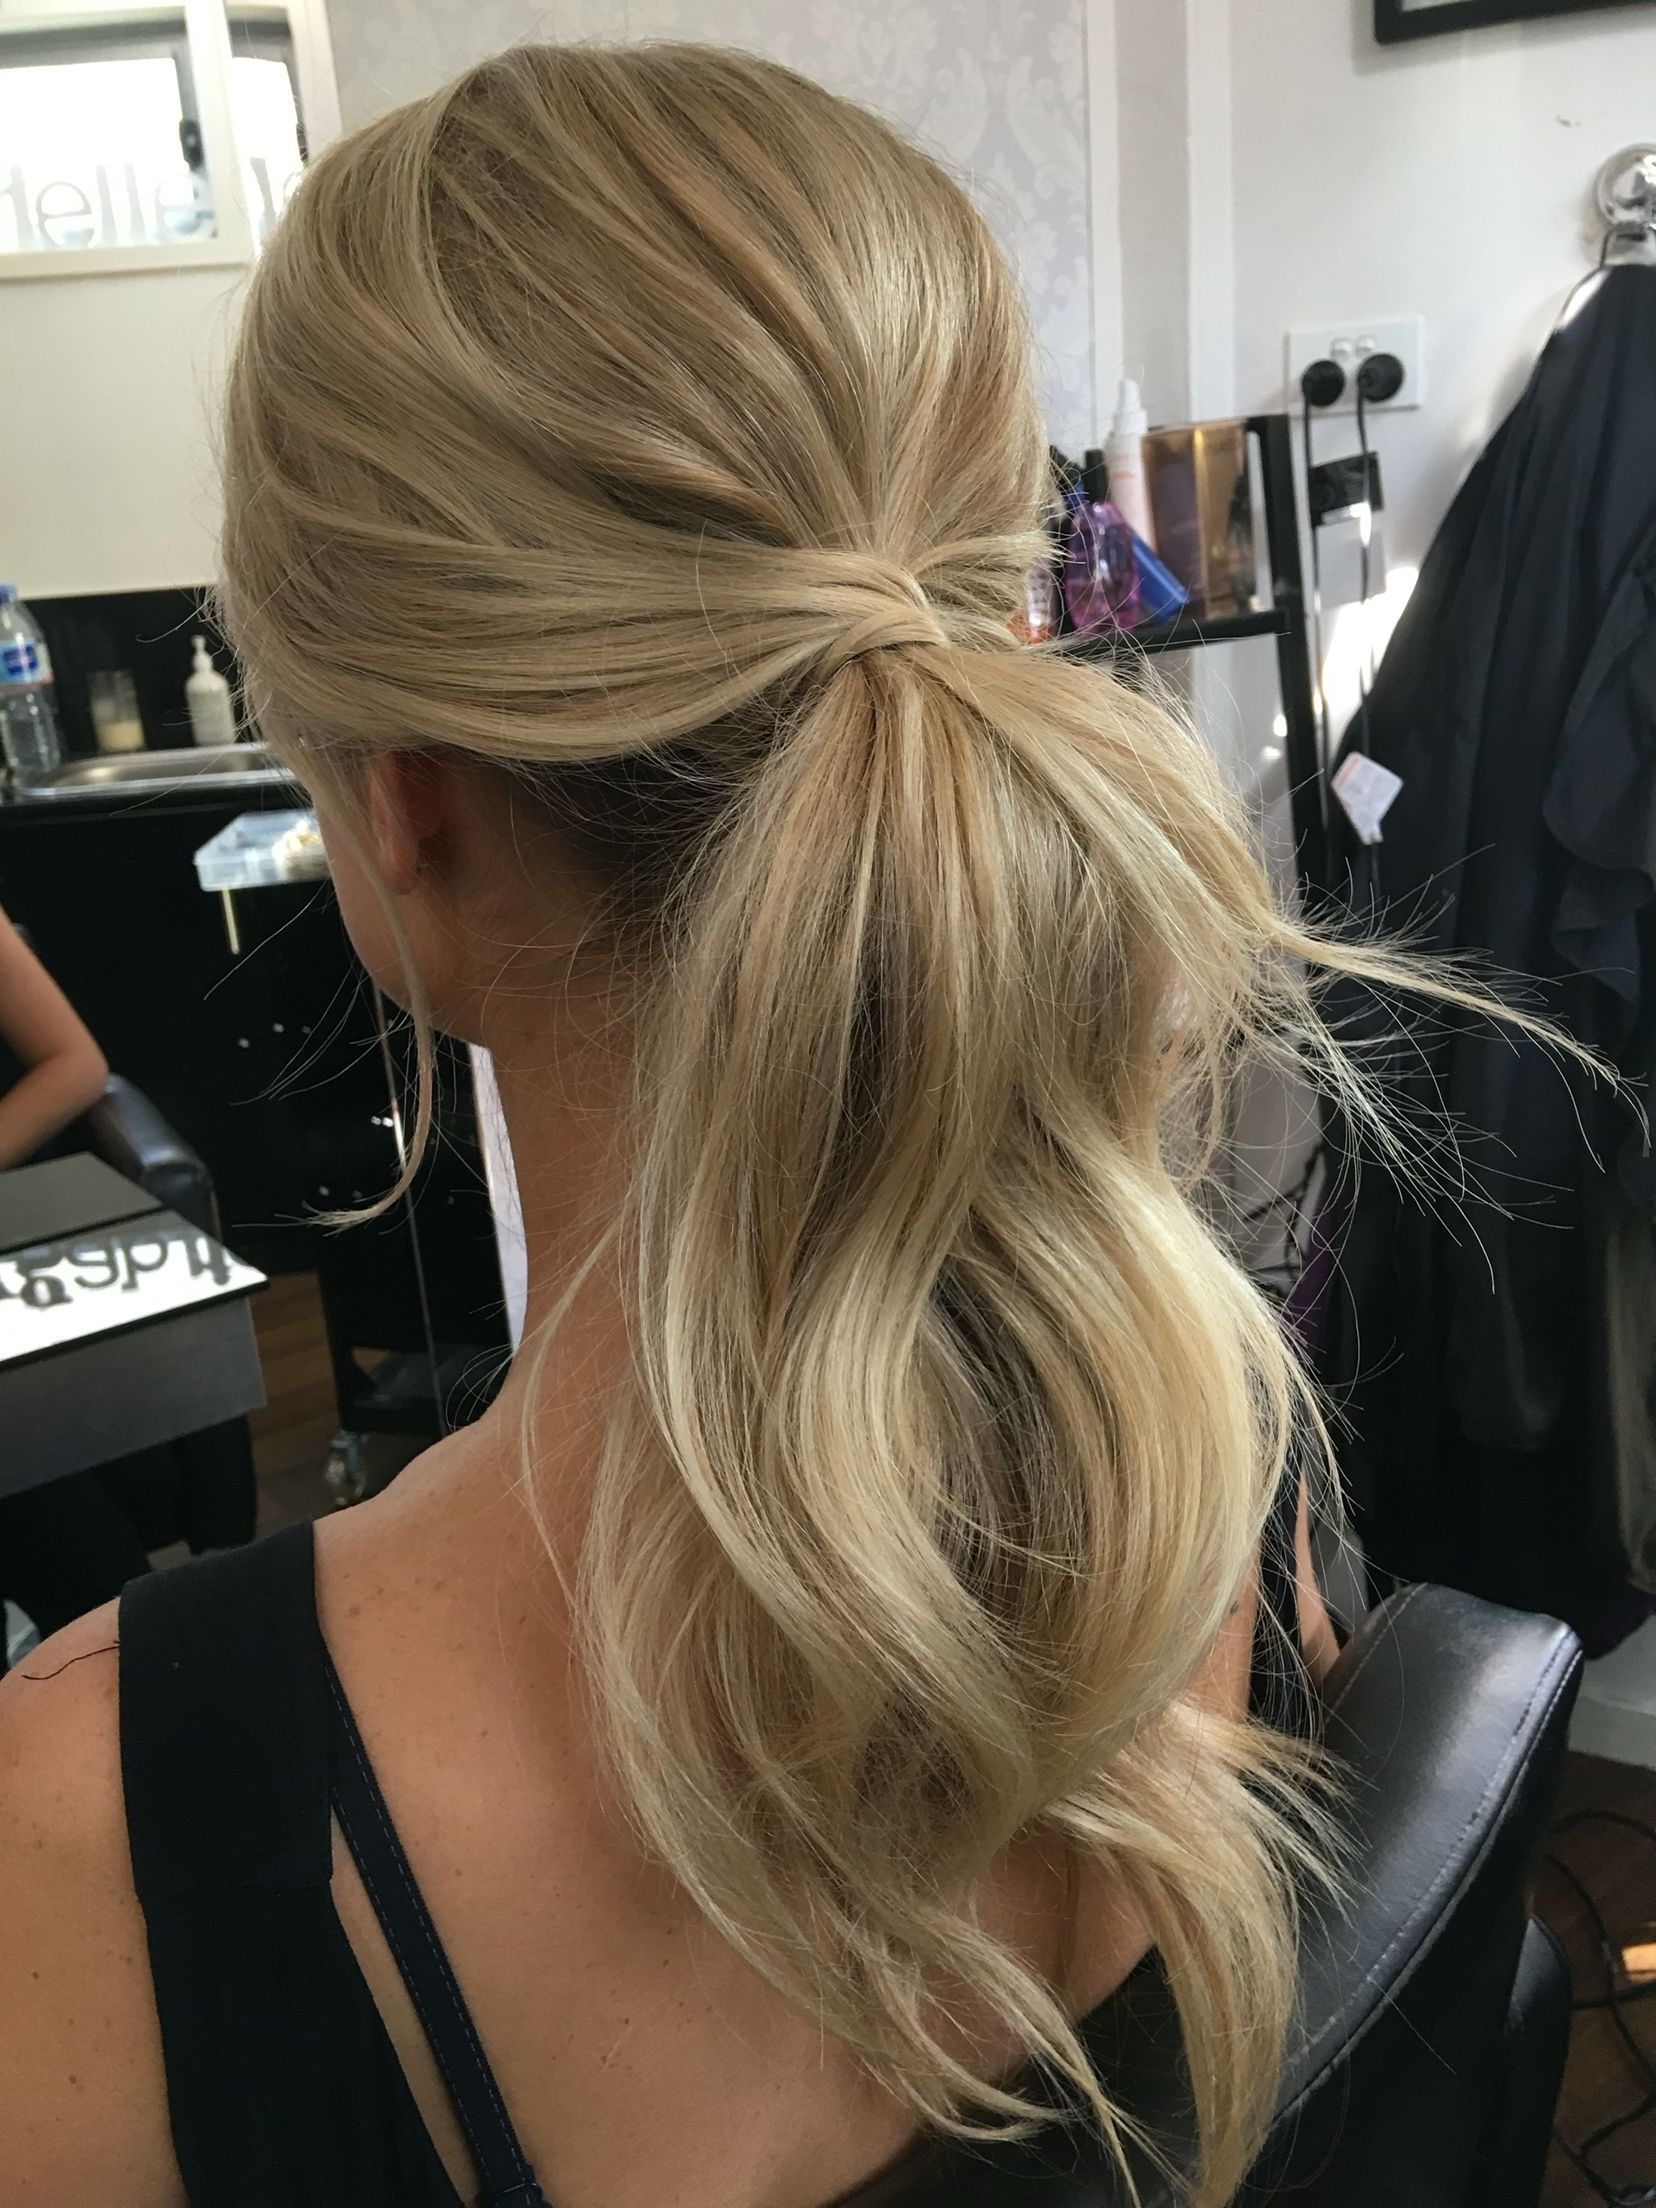 Messy Ponytail, Bridal Hair And Regarding 2017 Wedding Hairstyles With Ponytail (View 2 of 15)